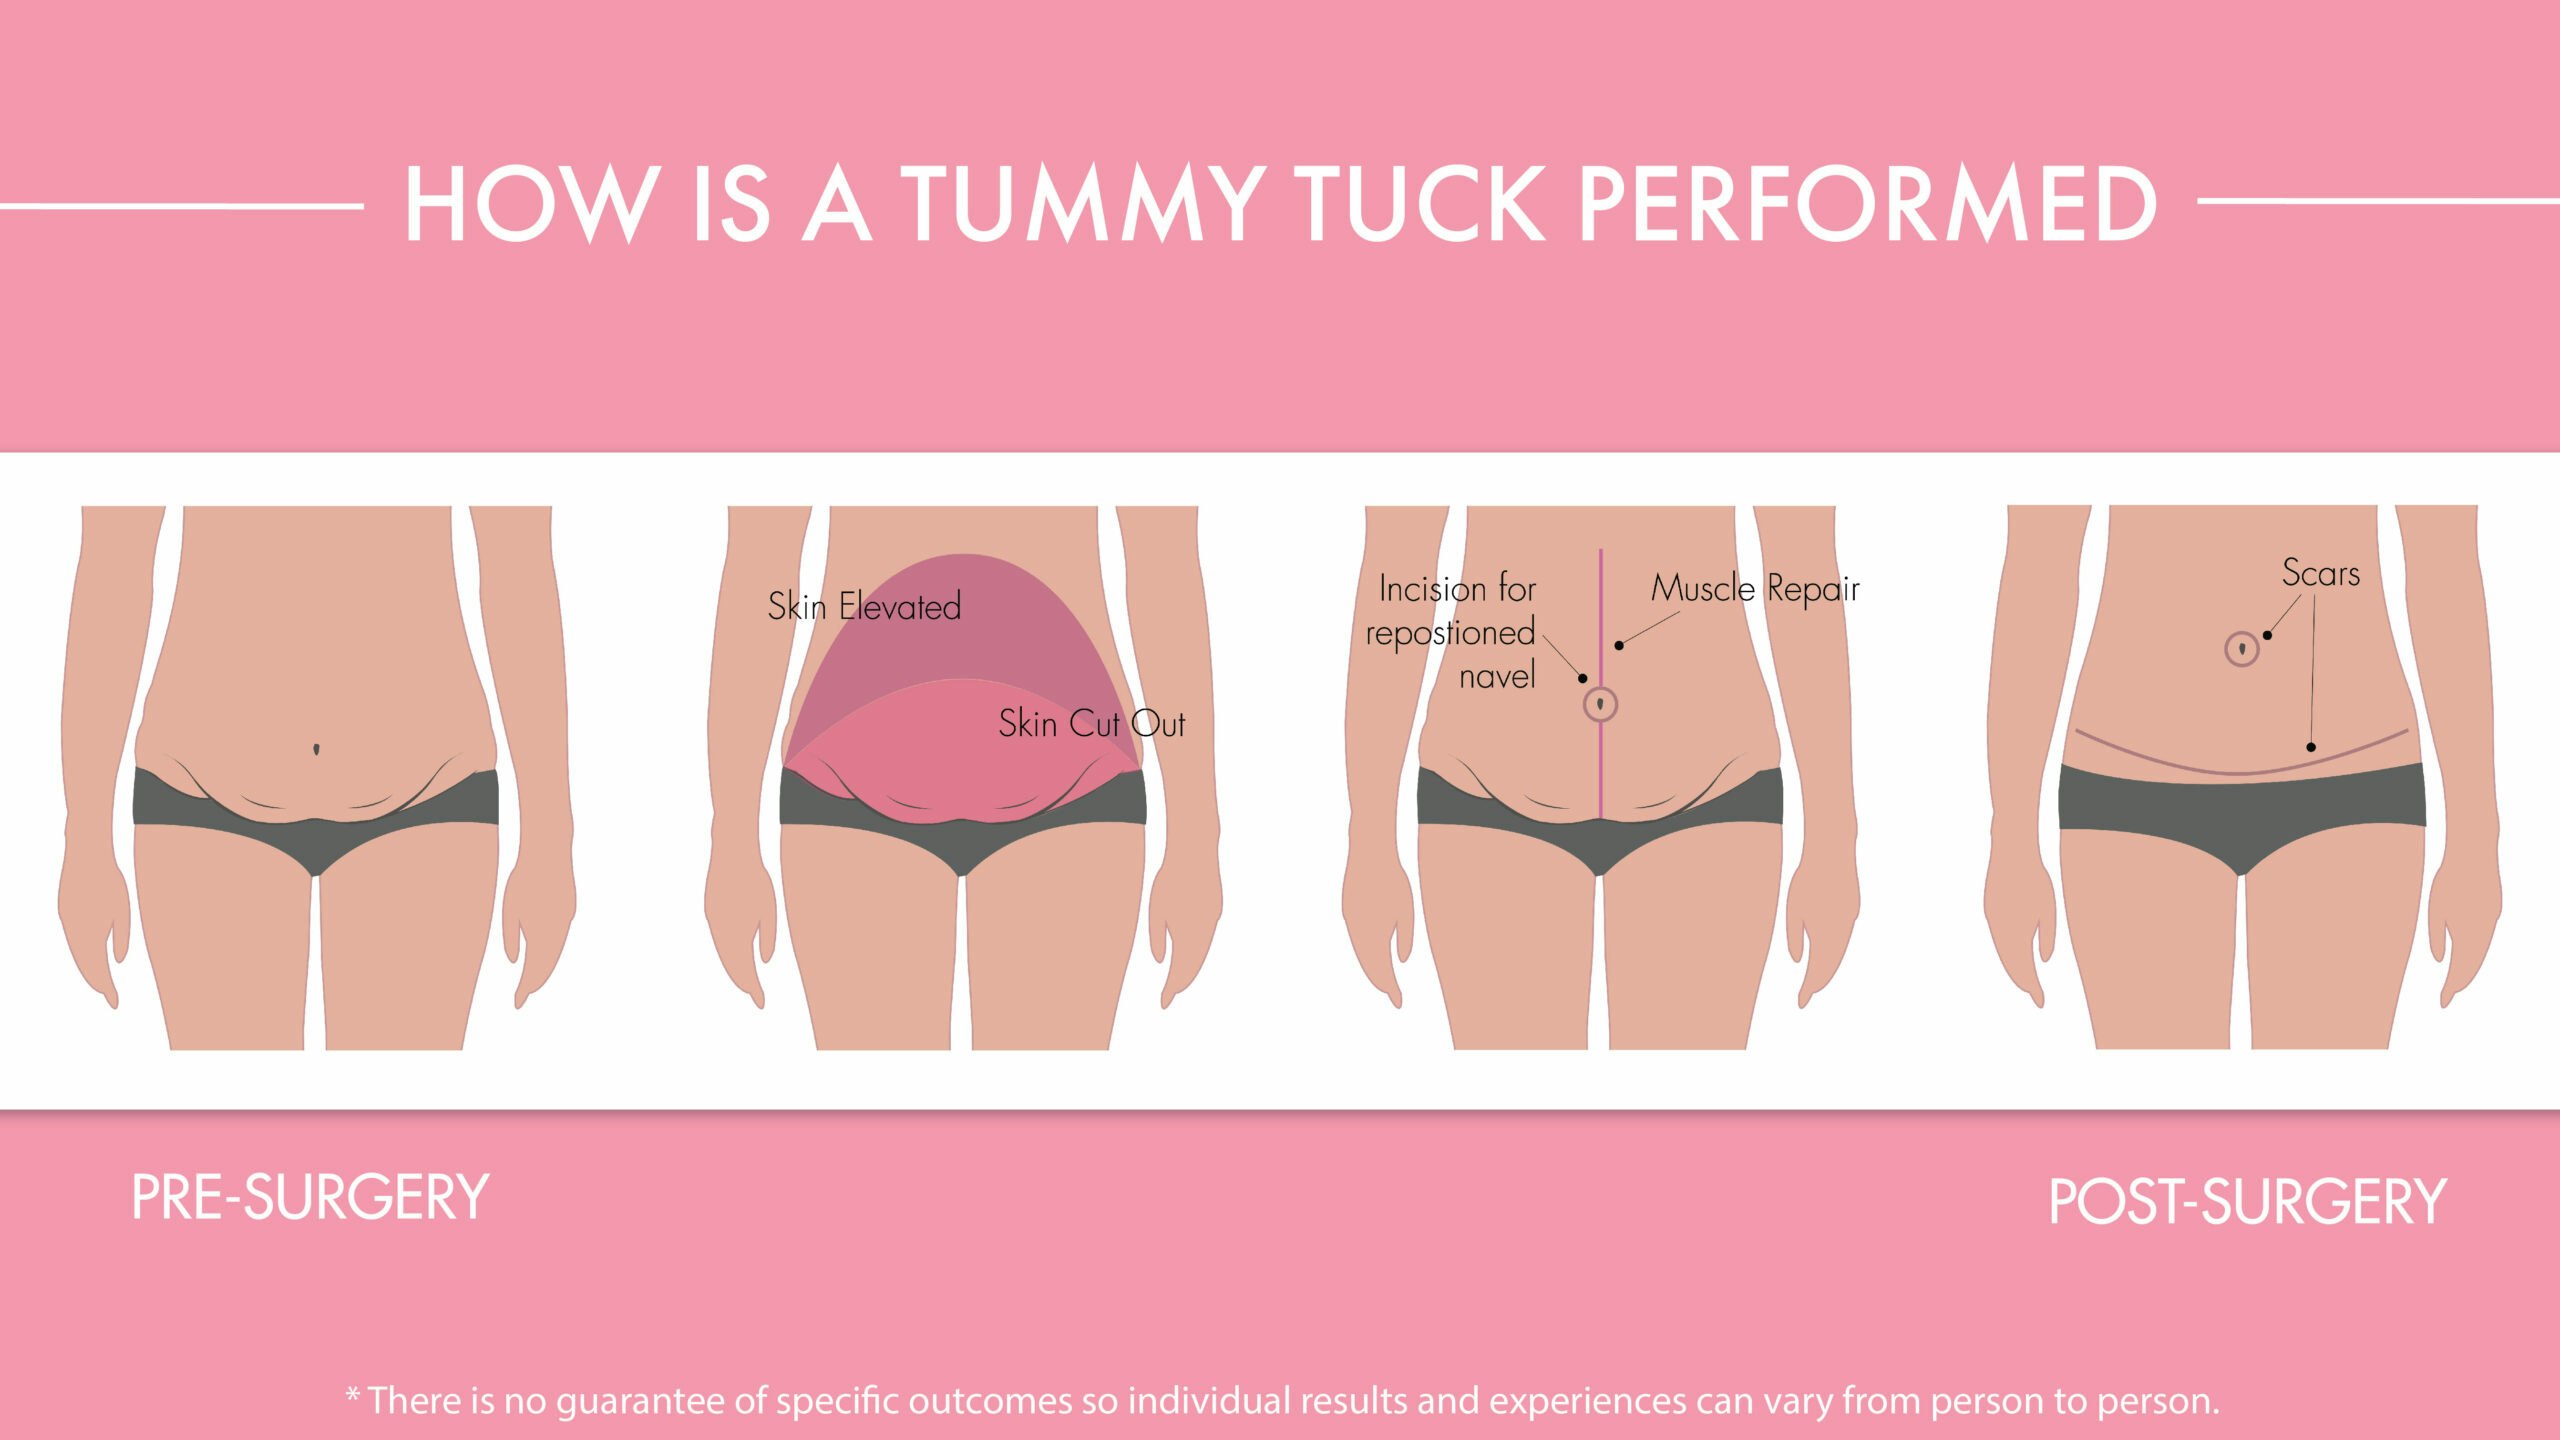 Can you have a Tummy Tuck after a C-Section?